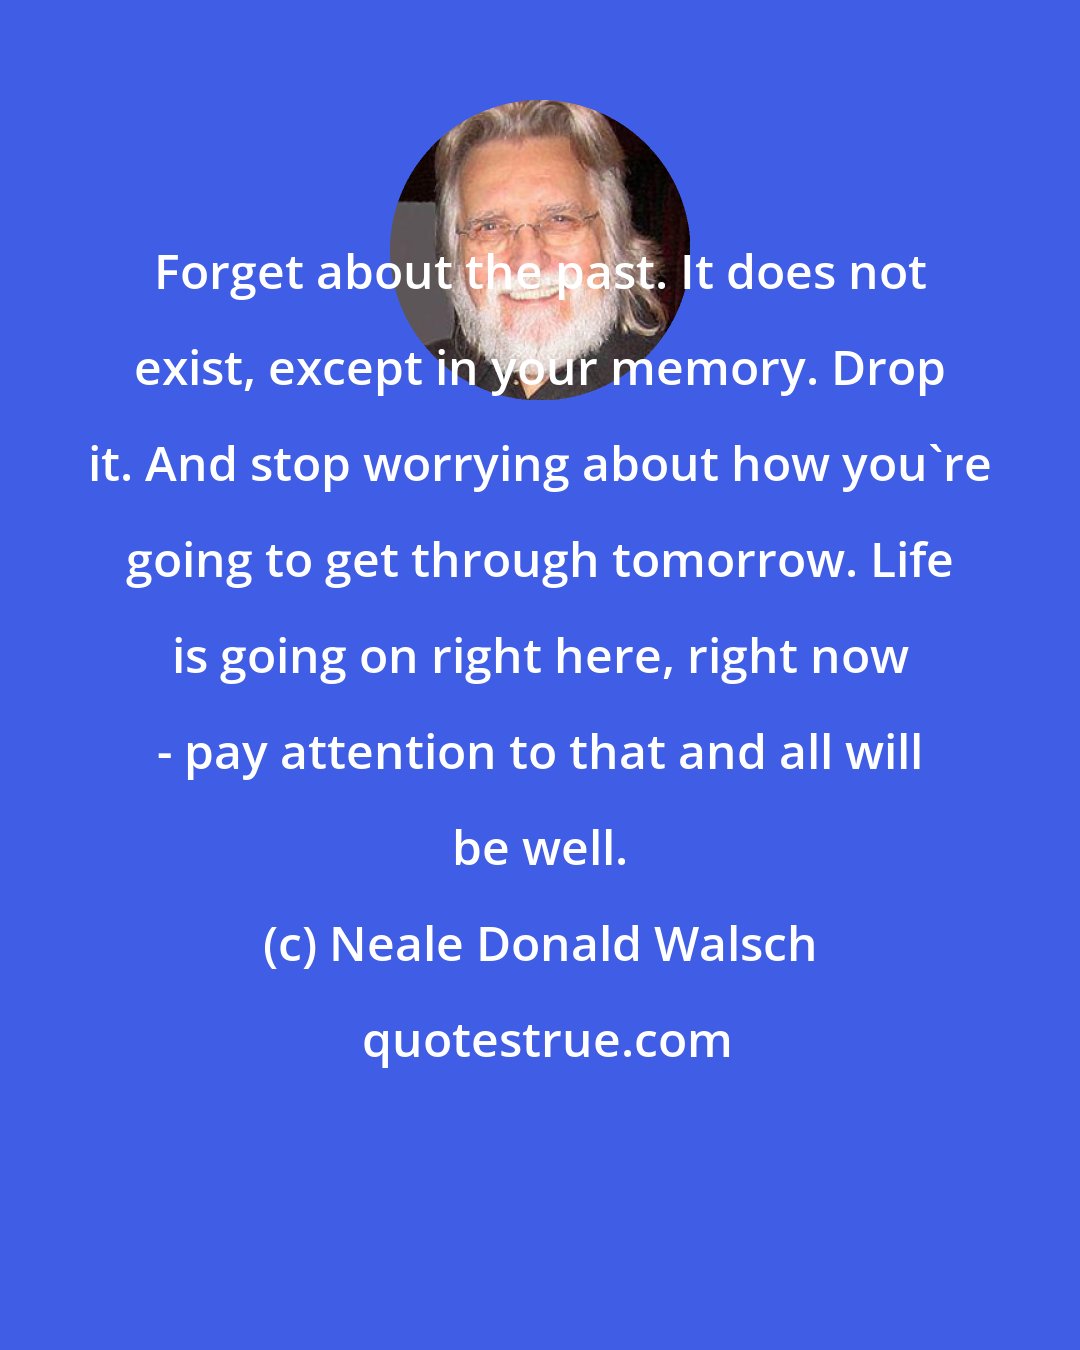 Neale Donald Walsch: Forget about the past. It does not exist, except in your memory. Drop it. And stop worrying about how you're going to get through tomorrow. Life is going on right here, right now - pay attention to that and all will be well.